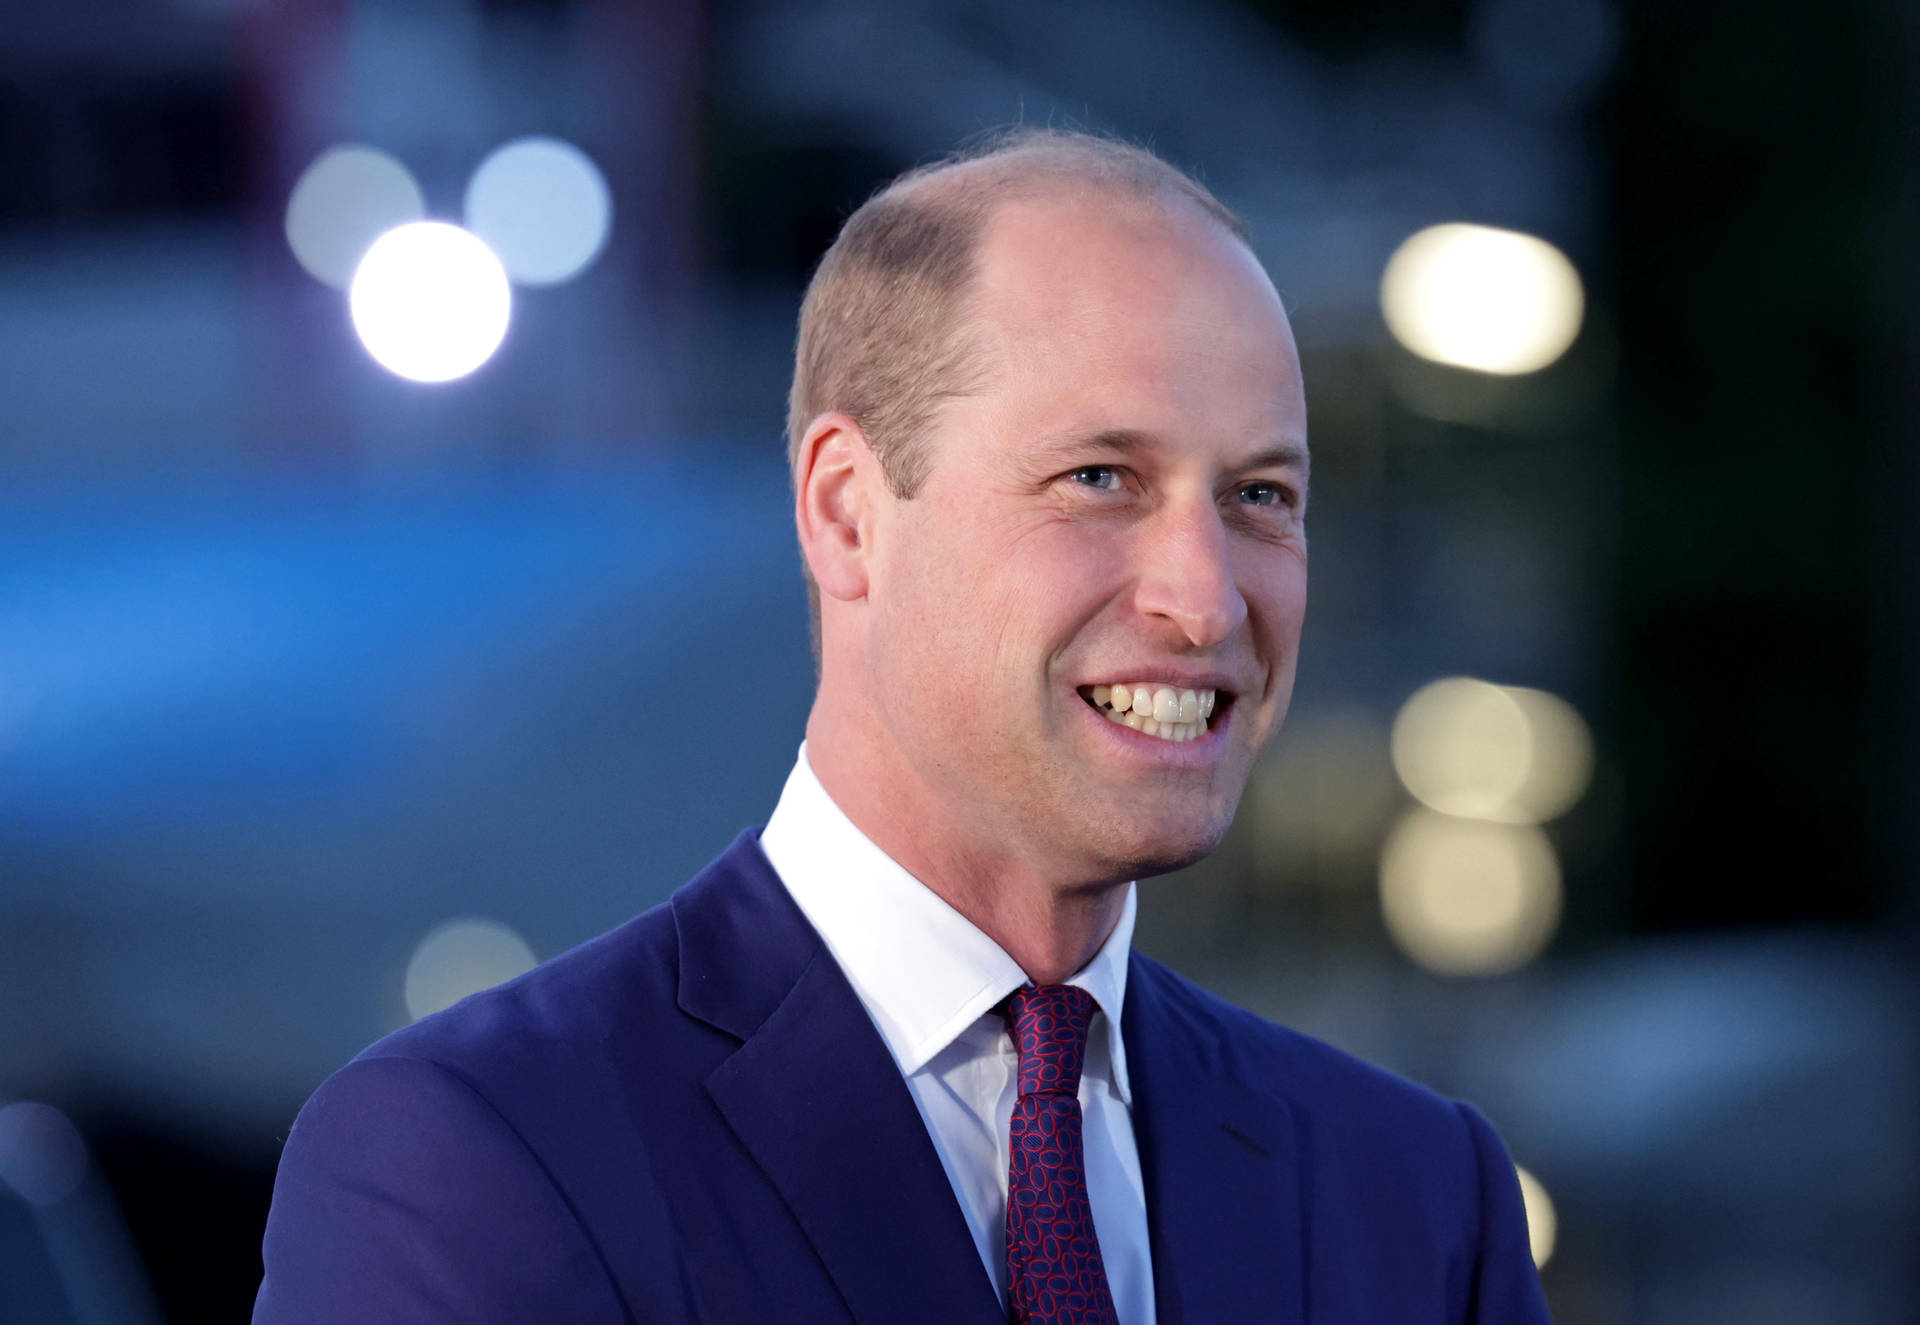 Prince William Smiling Wide